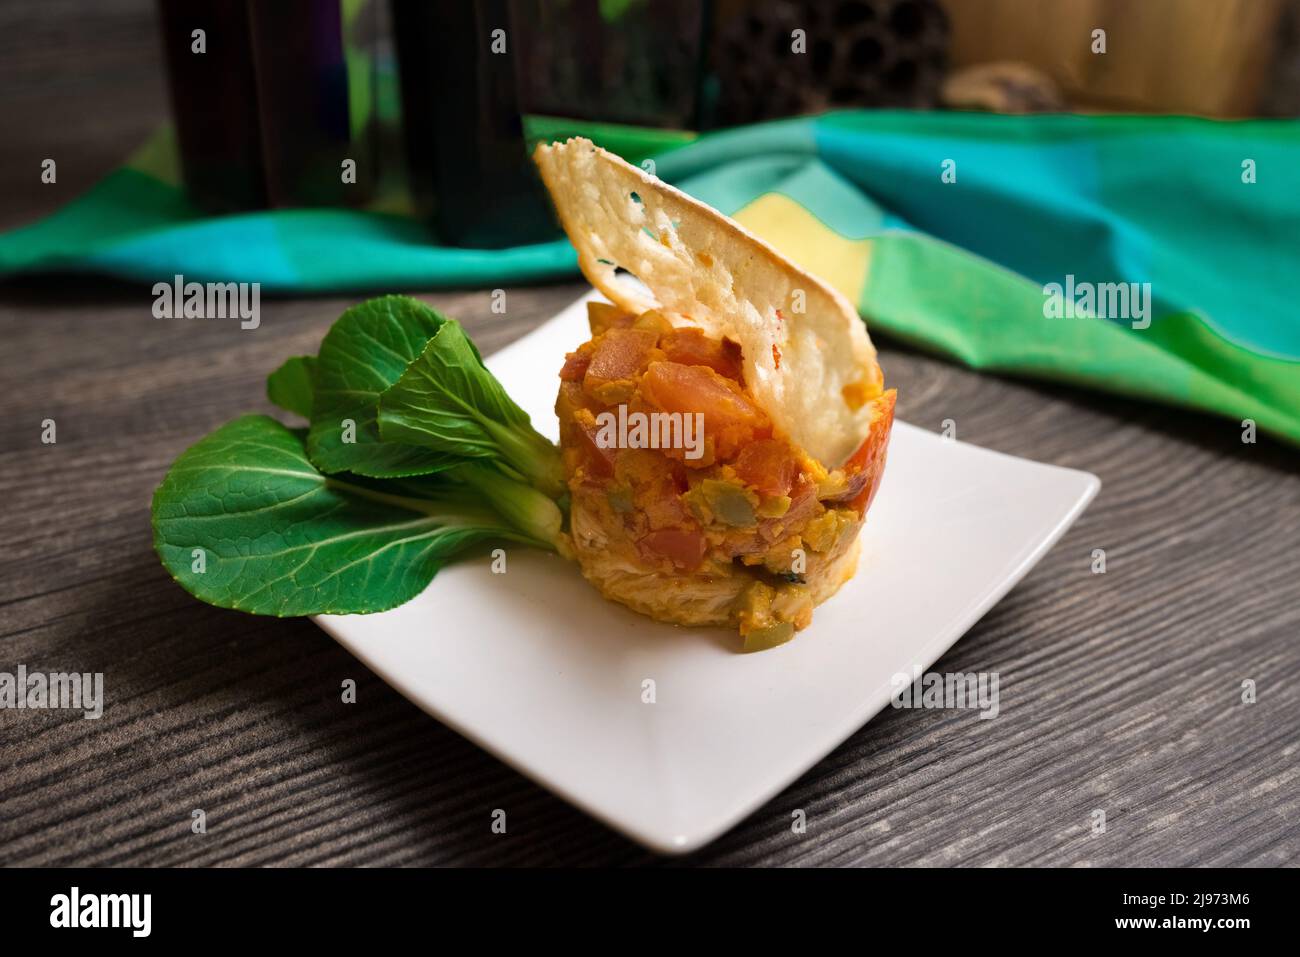 Chicken escalope with spicy tomato and olive relish. Decorated with slim slice of crouton, fresh young pak choi. Salad ring used to form a dish. Stock Photo